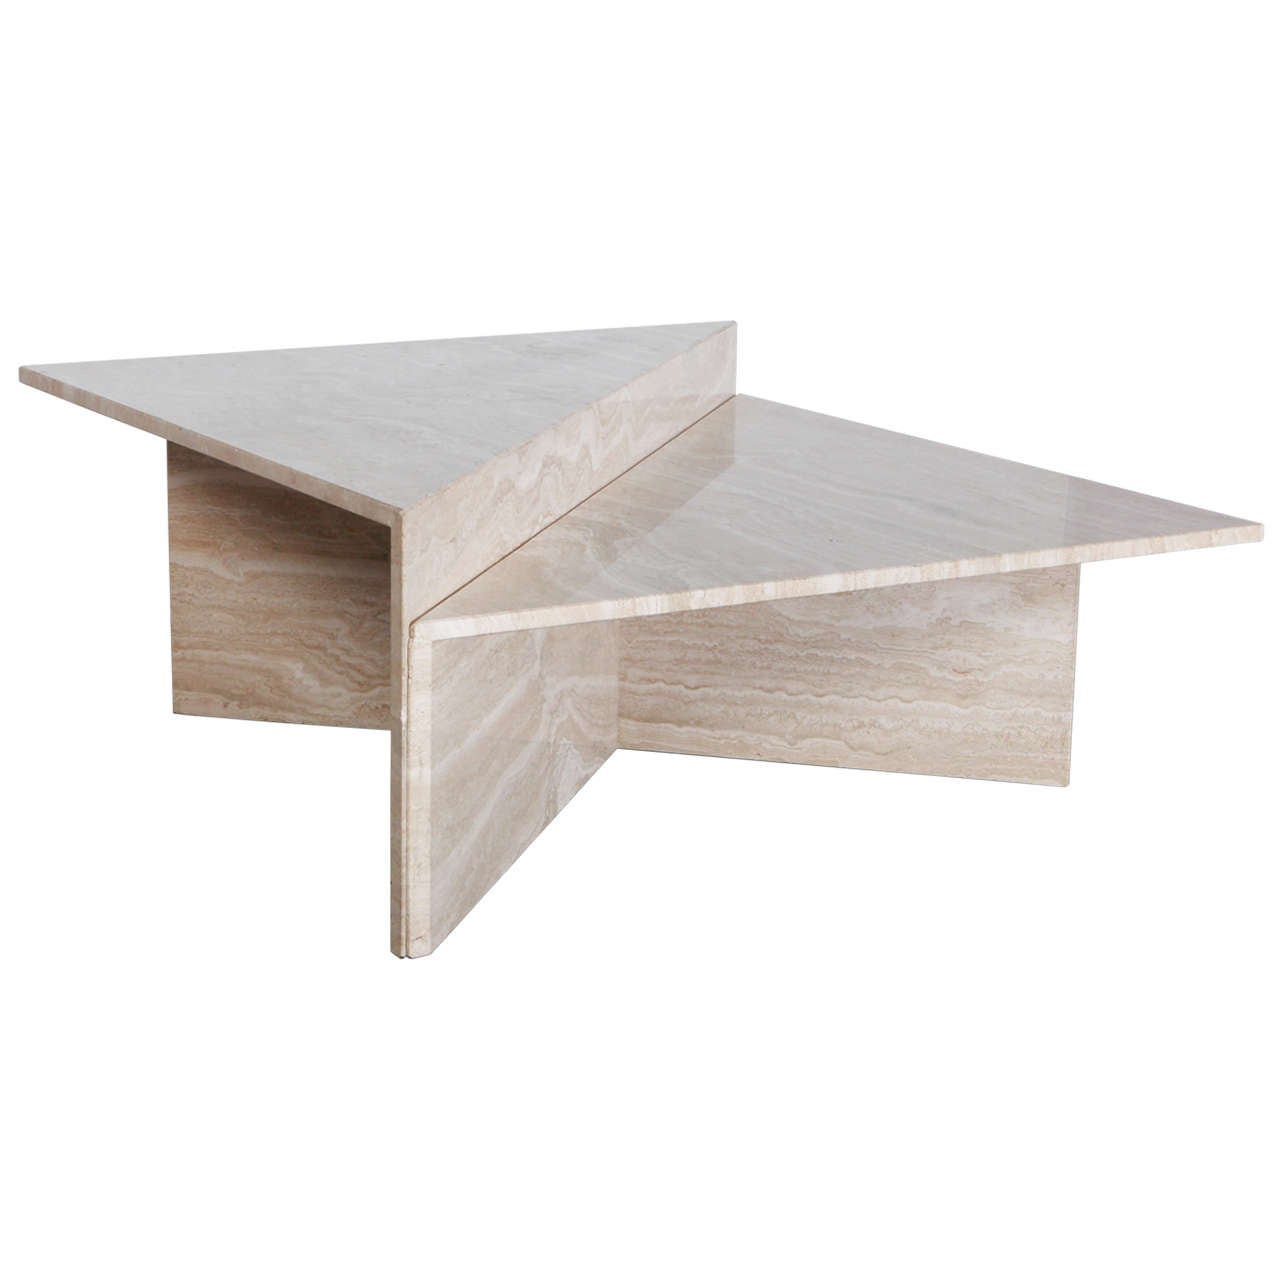 Two Piece Italian Travertine Coffee Table For Sale